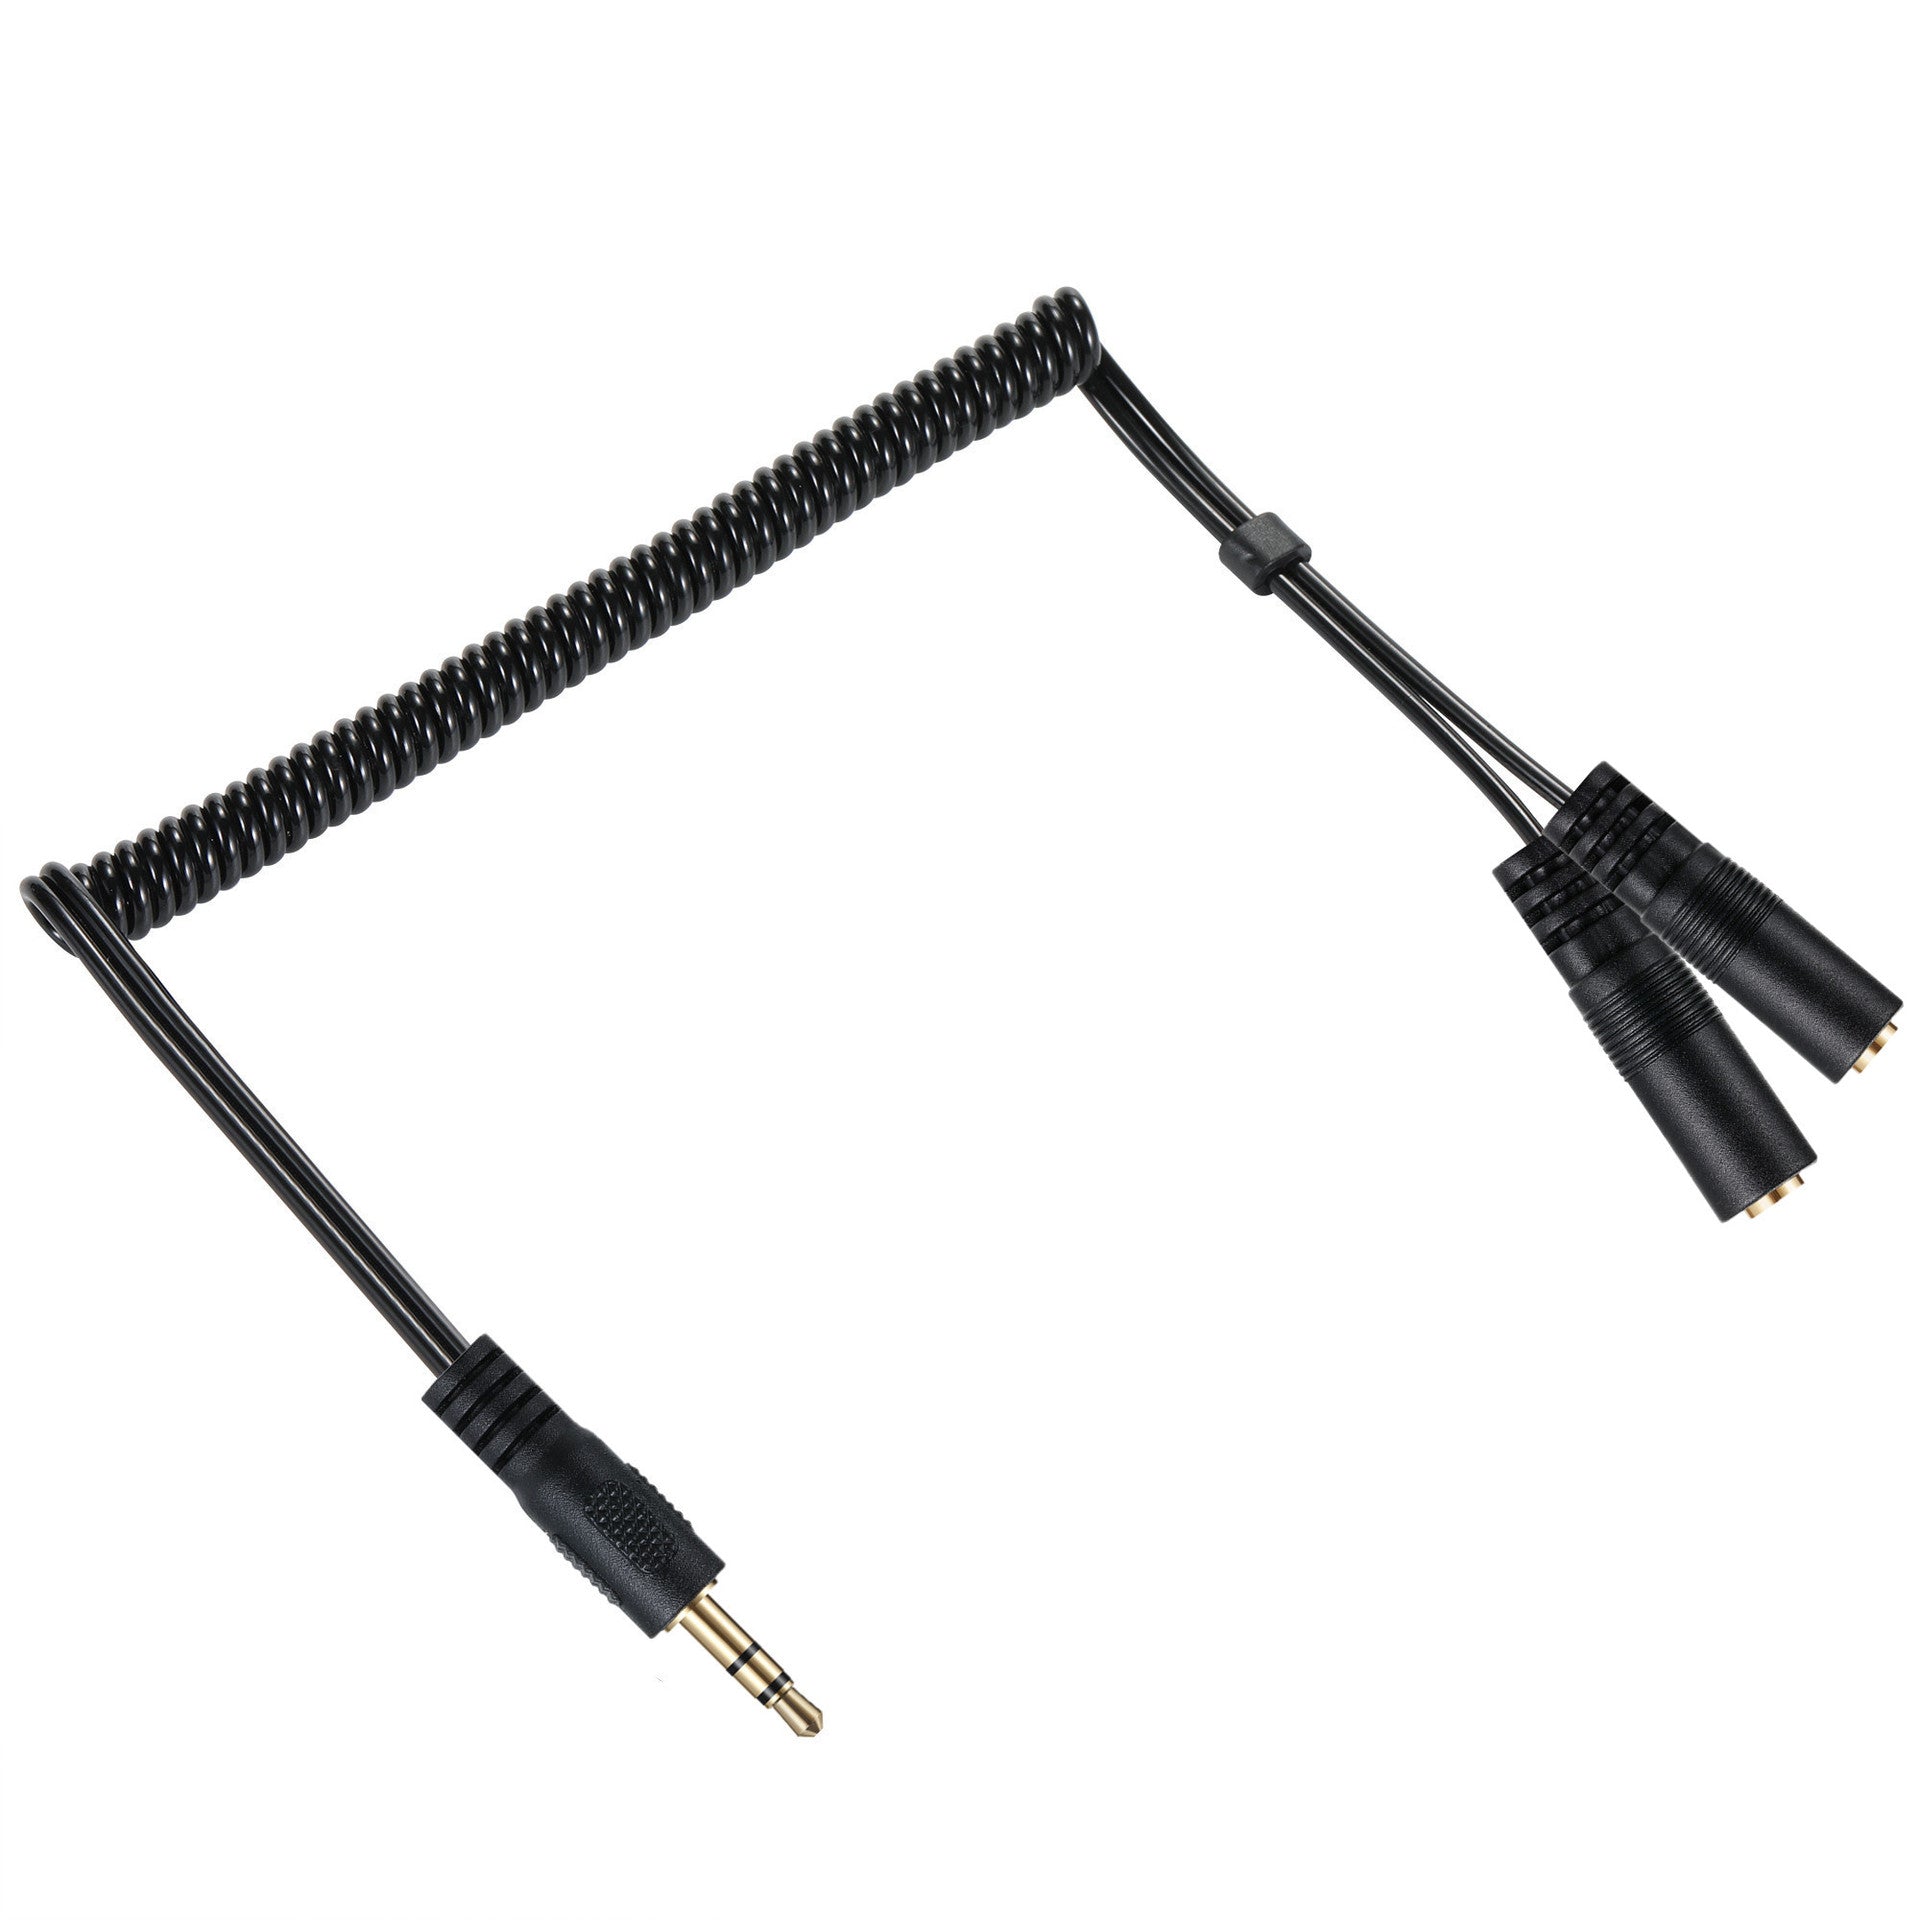 3.5mm 3 Pole Male to 2 x 3.5mm Female Audio Stereo Headphone Y Splitter Cable